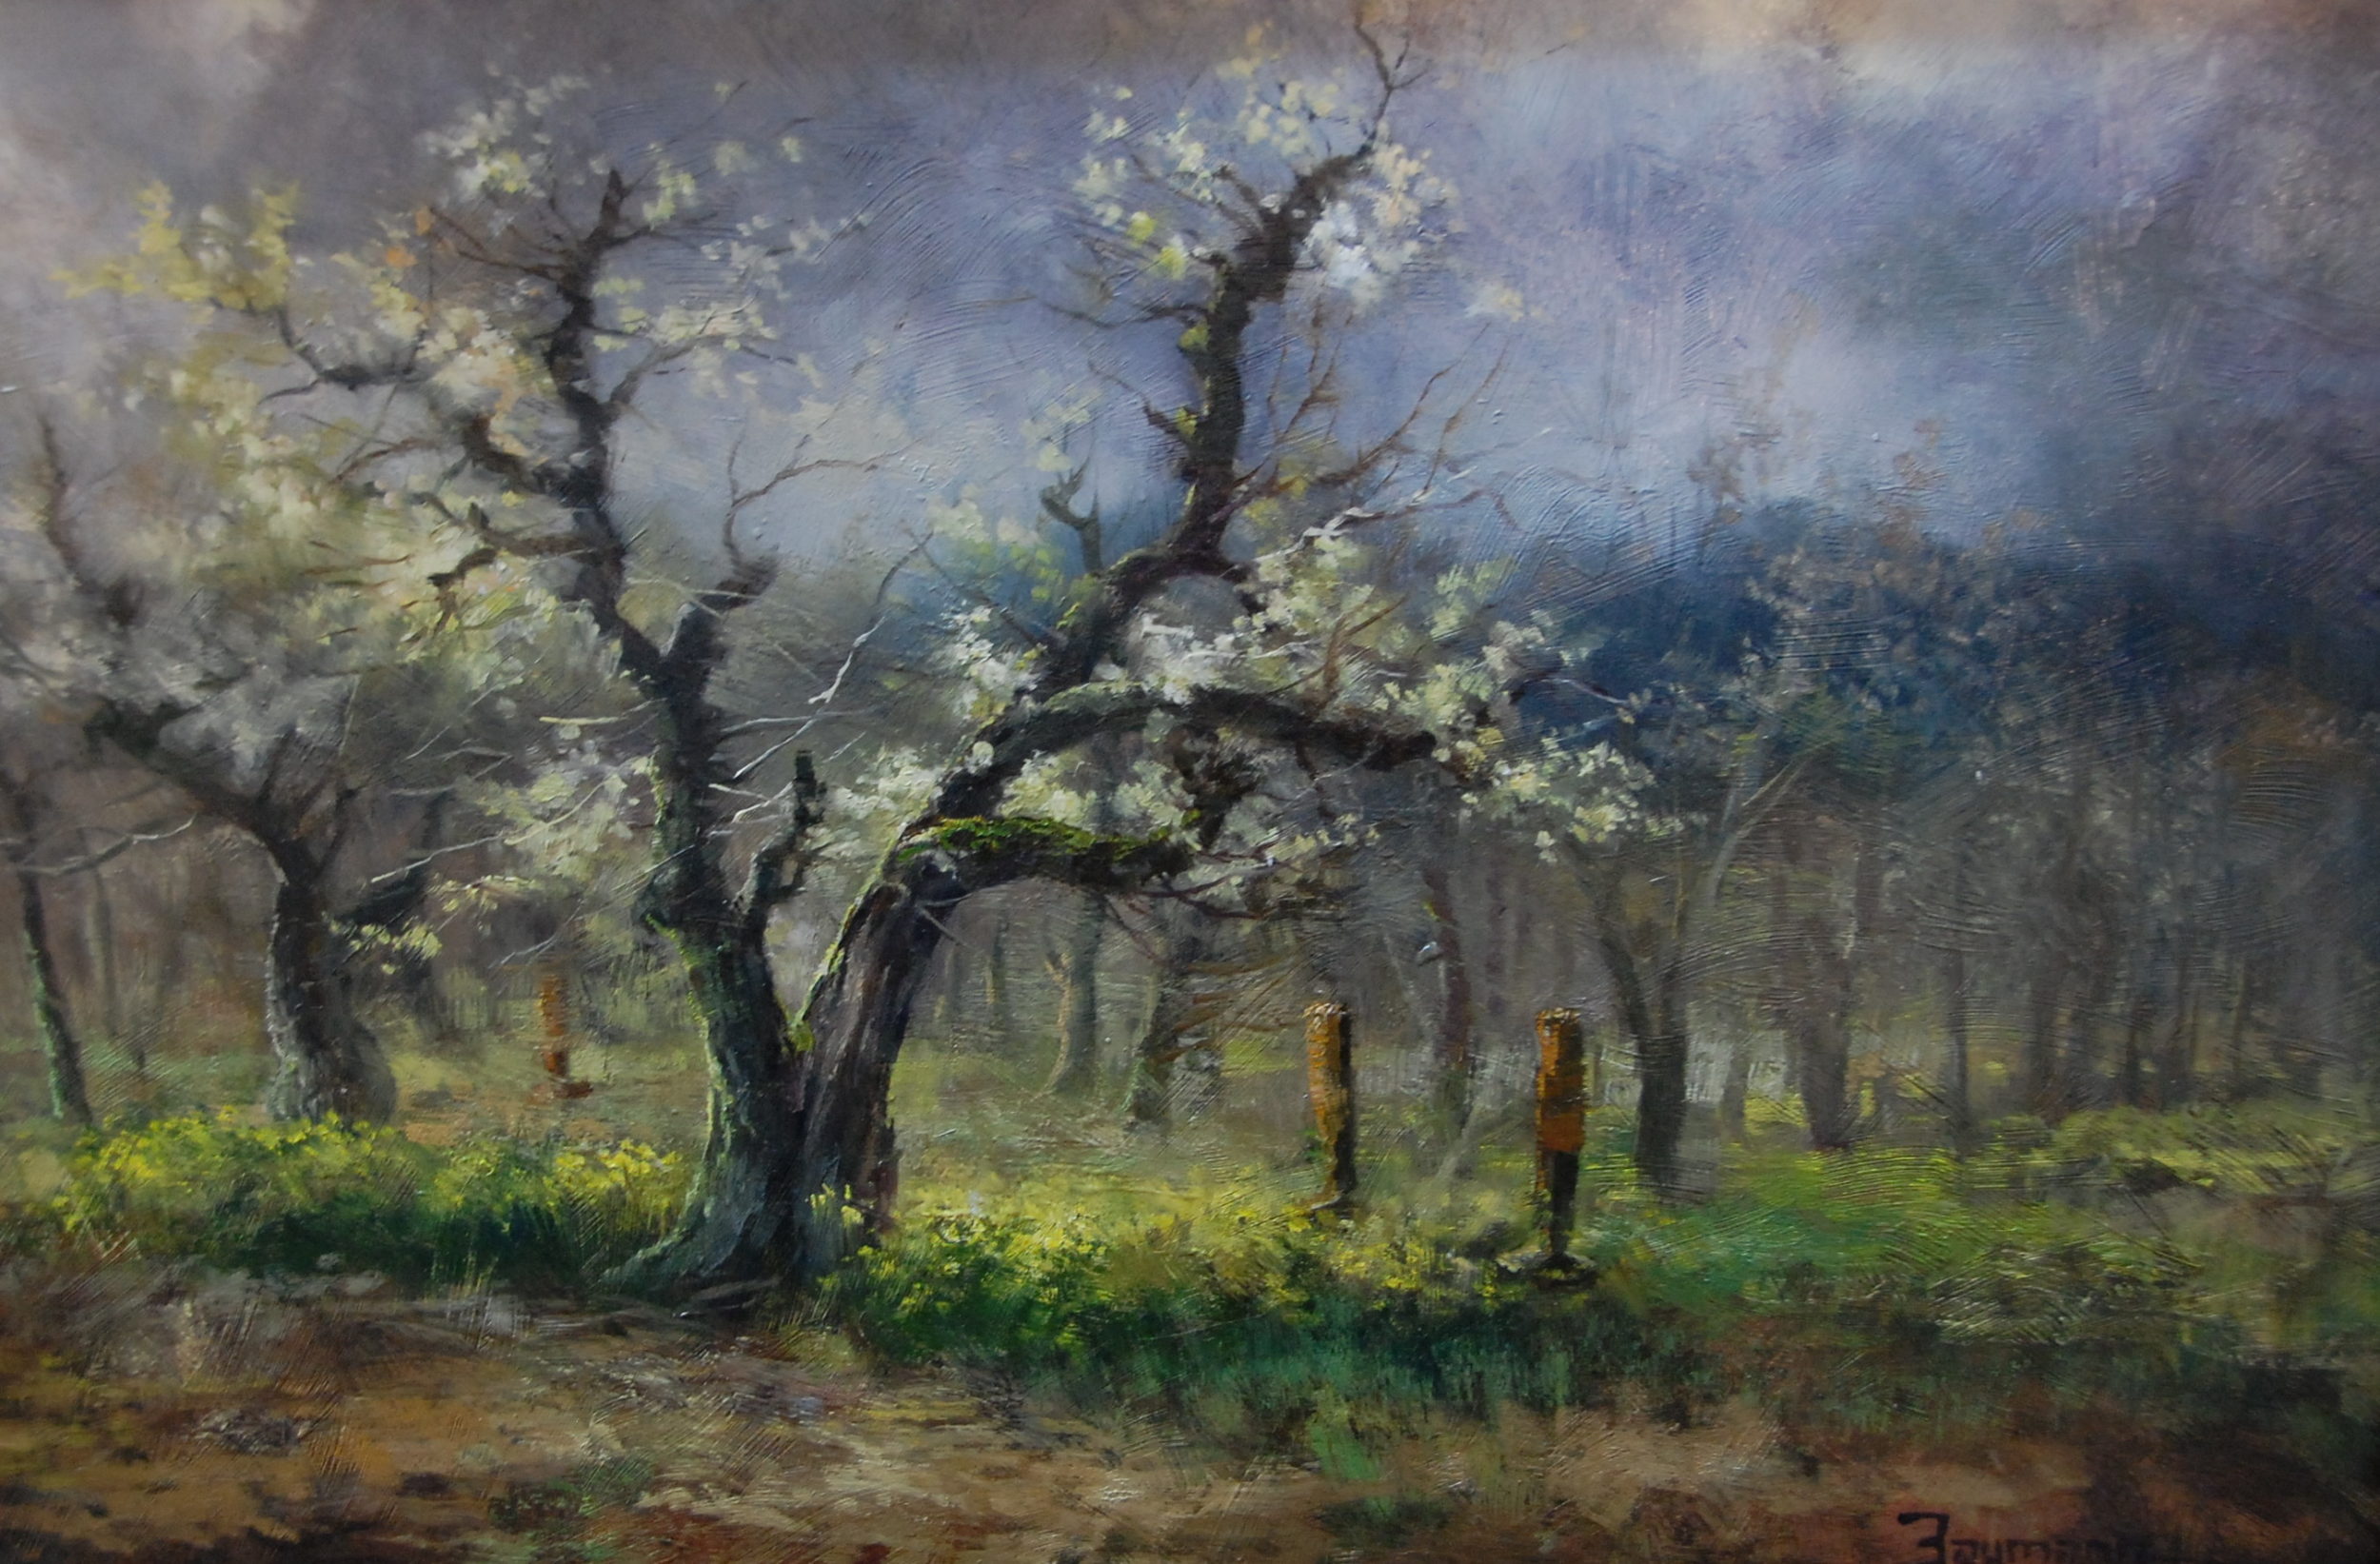 Ashland Orchard, painting of a pear orchard with early blooms by Stefan Baumann. Collection of Kris Baxter, Mt Shasta, California